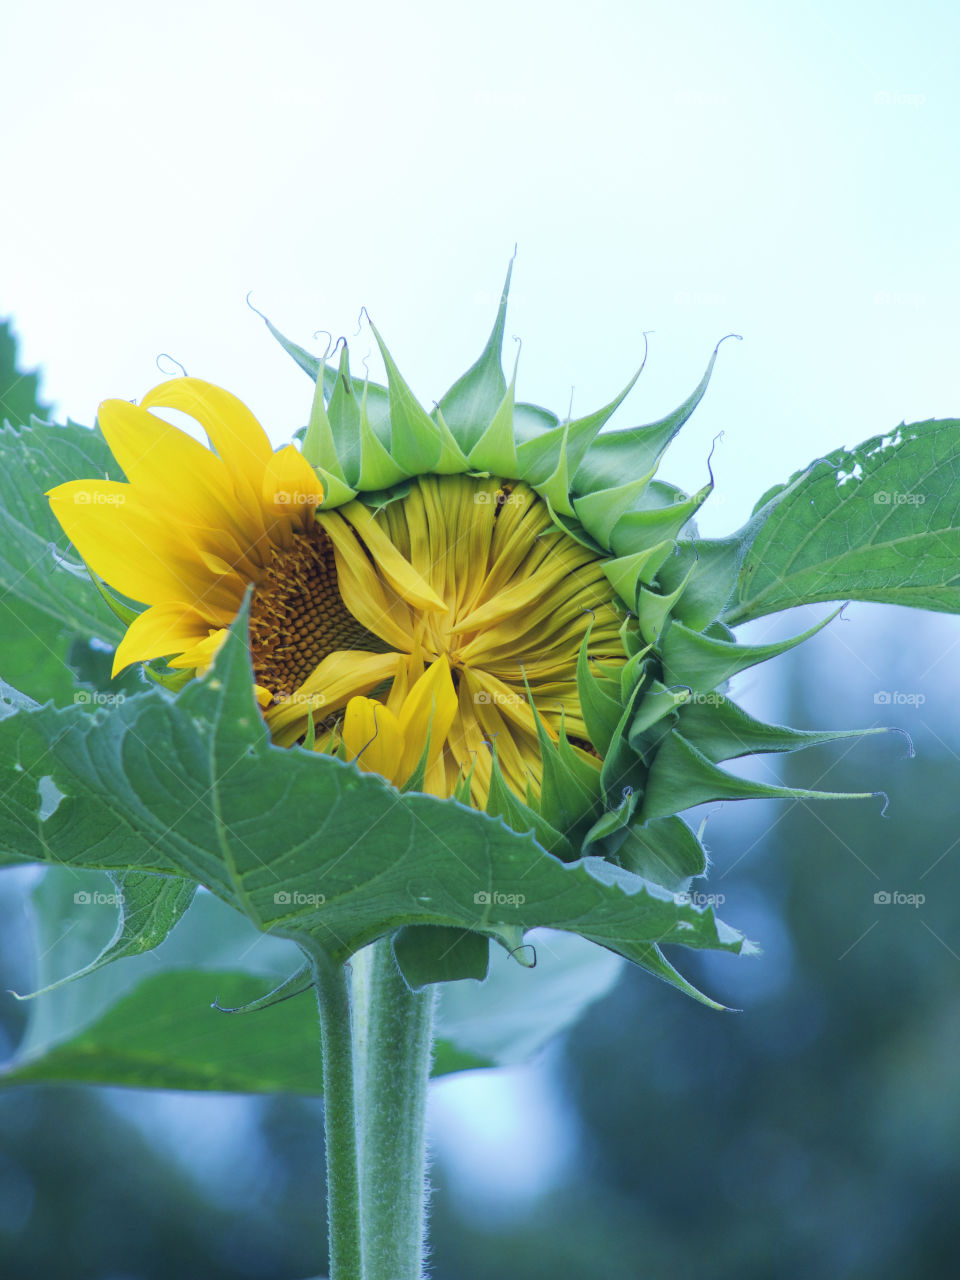 Perfect imperfections in a beautiful sunflower with only a few petals open and the others still closed.